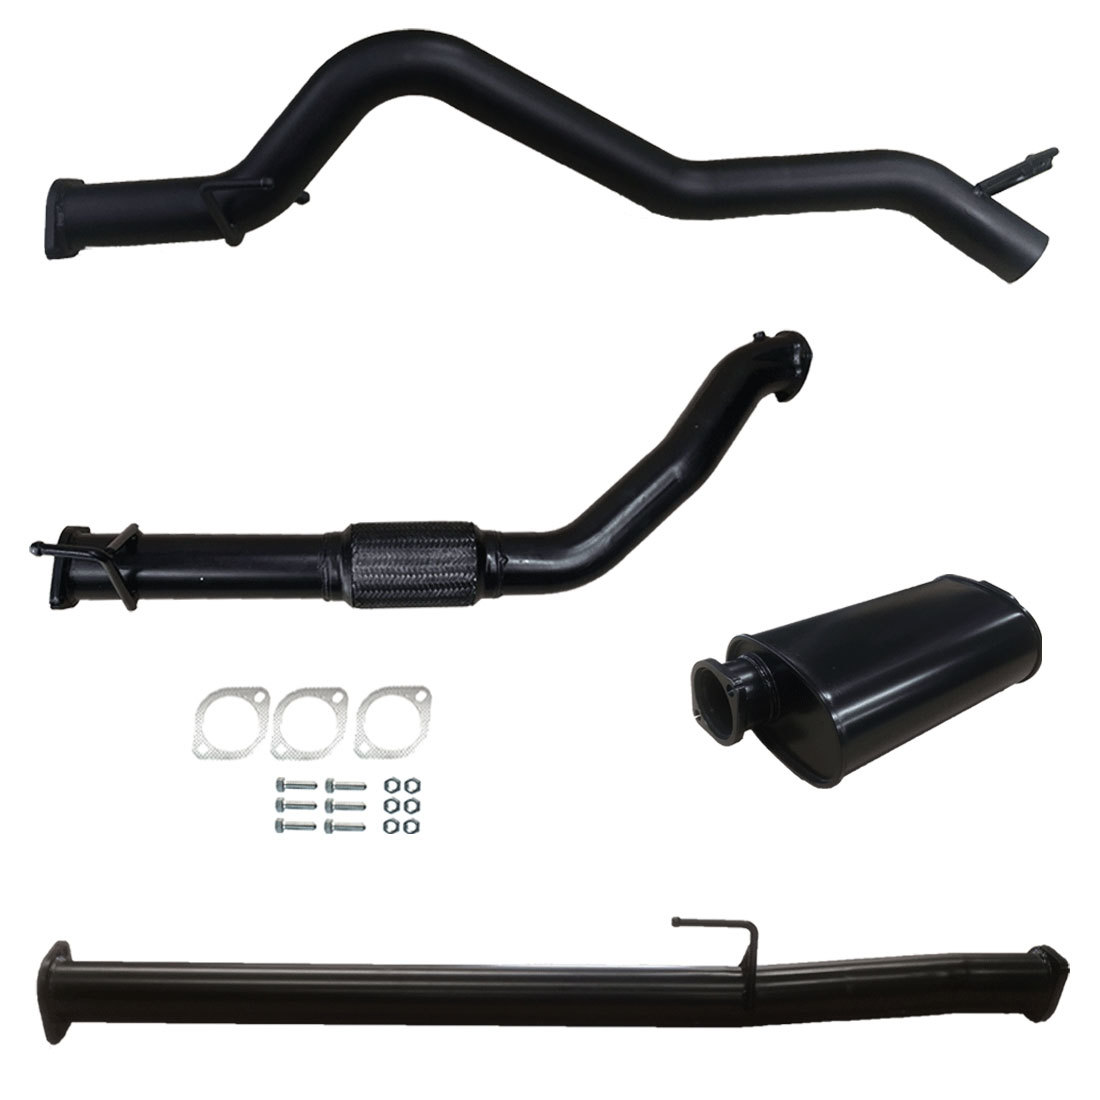 TOYOTA HILUX 3L TURBO DIESEL D4D KUN 3″ INCH TURBO BACK EXHAUST NO CAT WITH MUFFLER